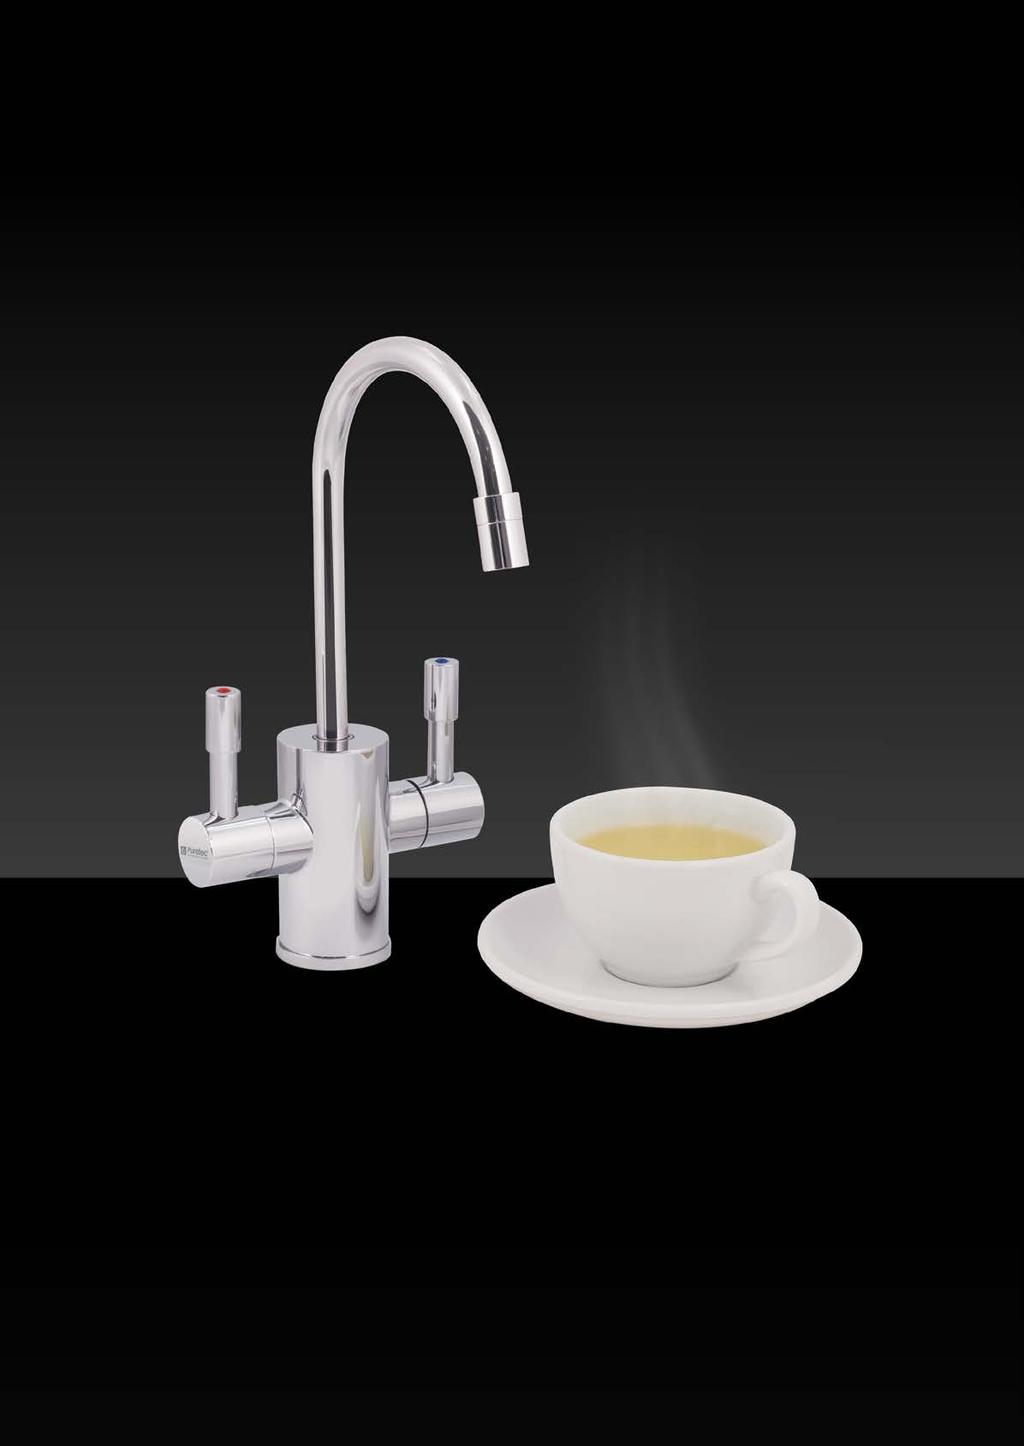 SPARQ H2 Steaming hot water in an instant.